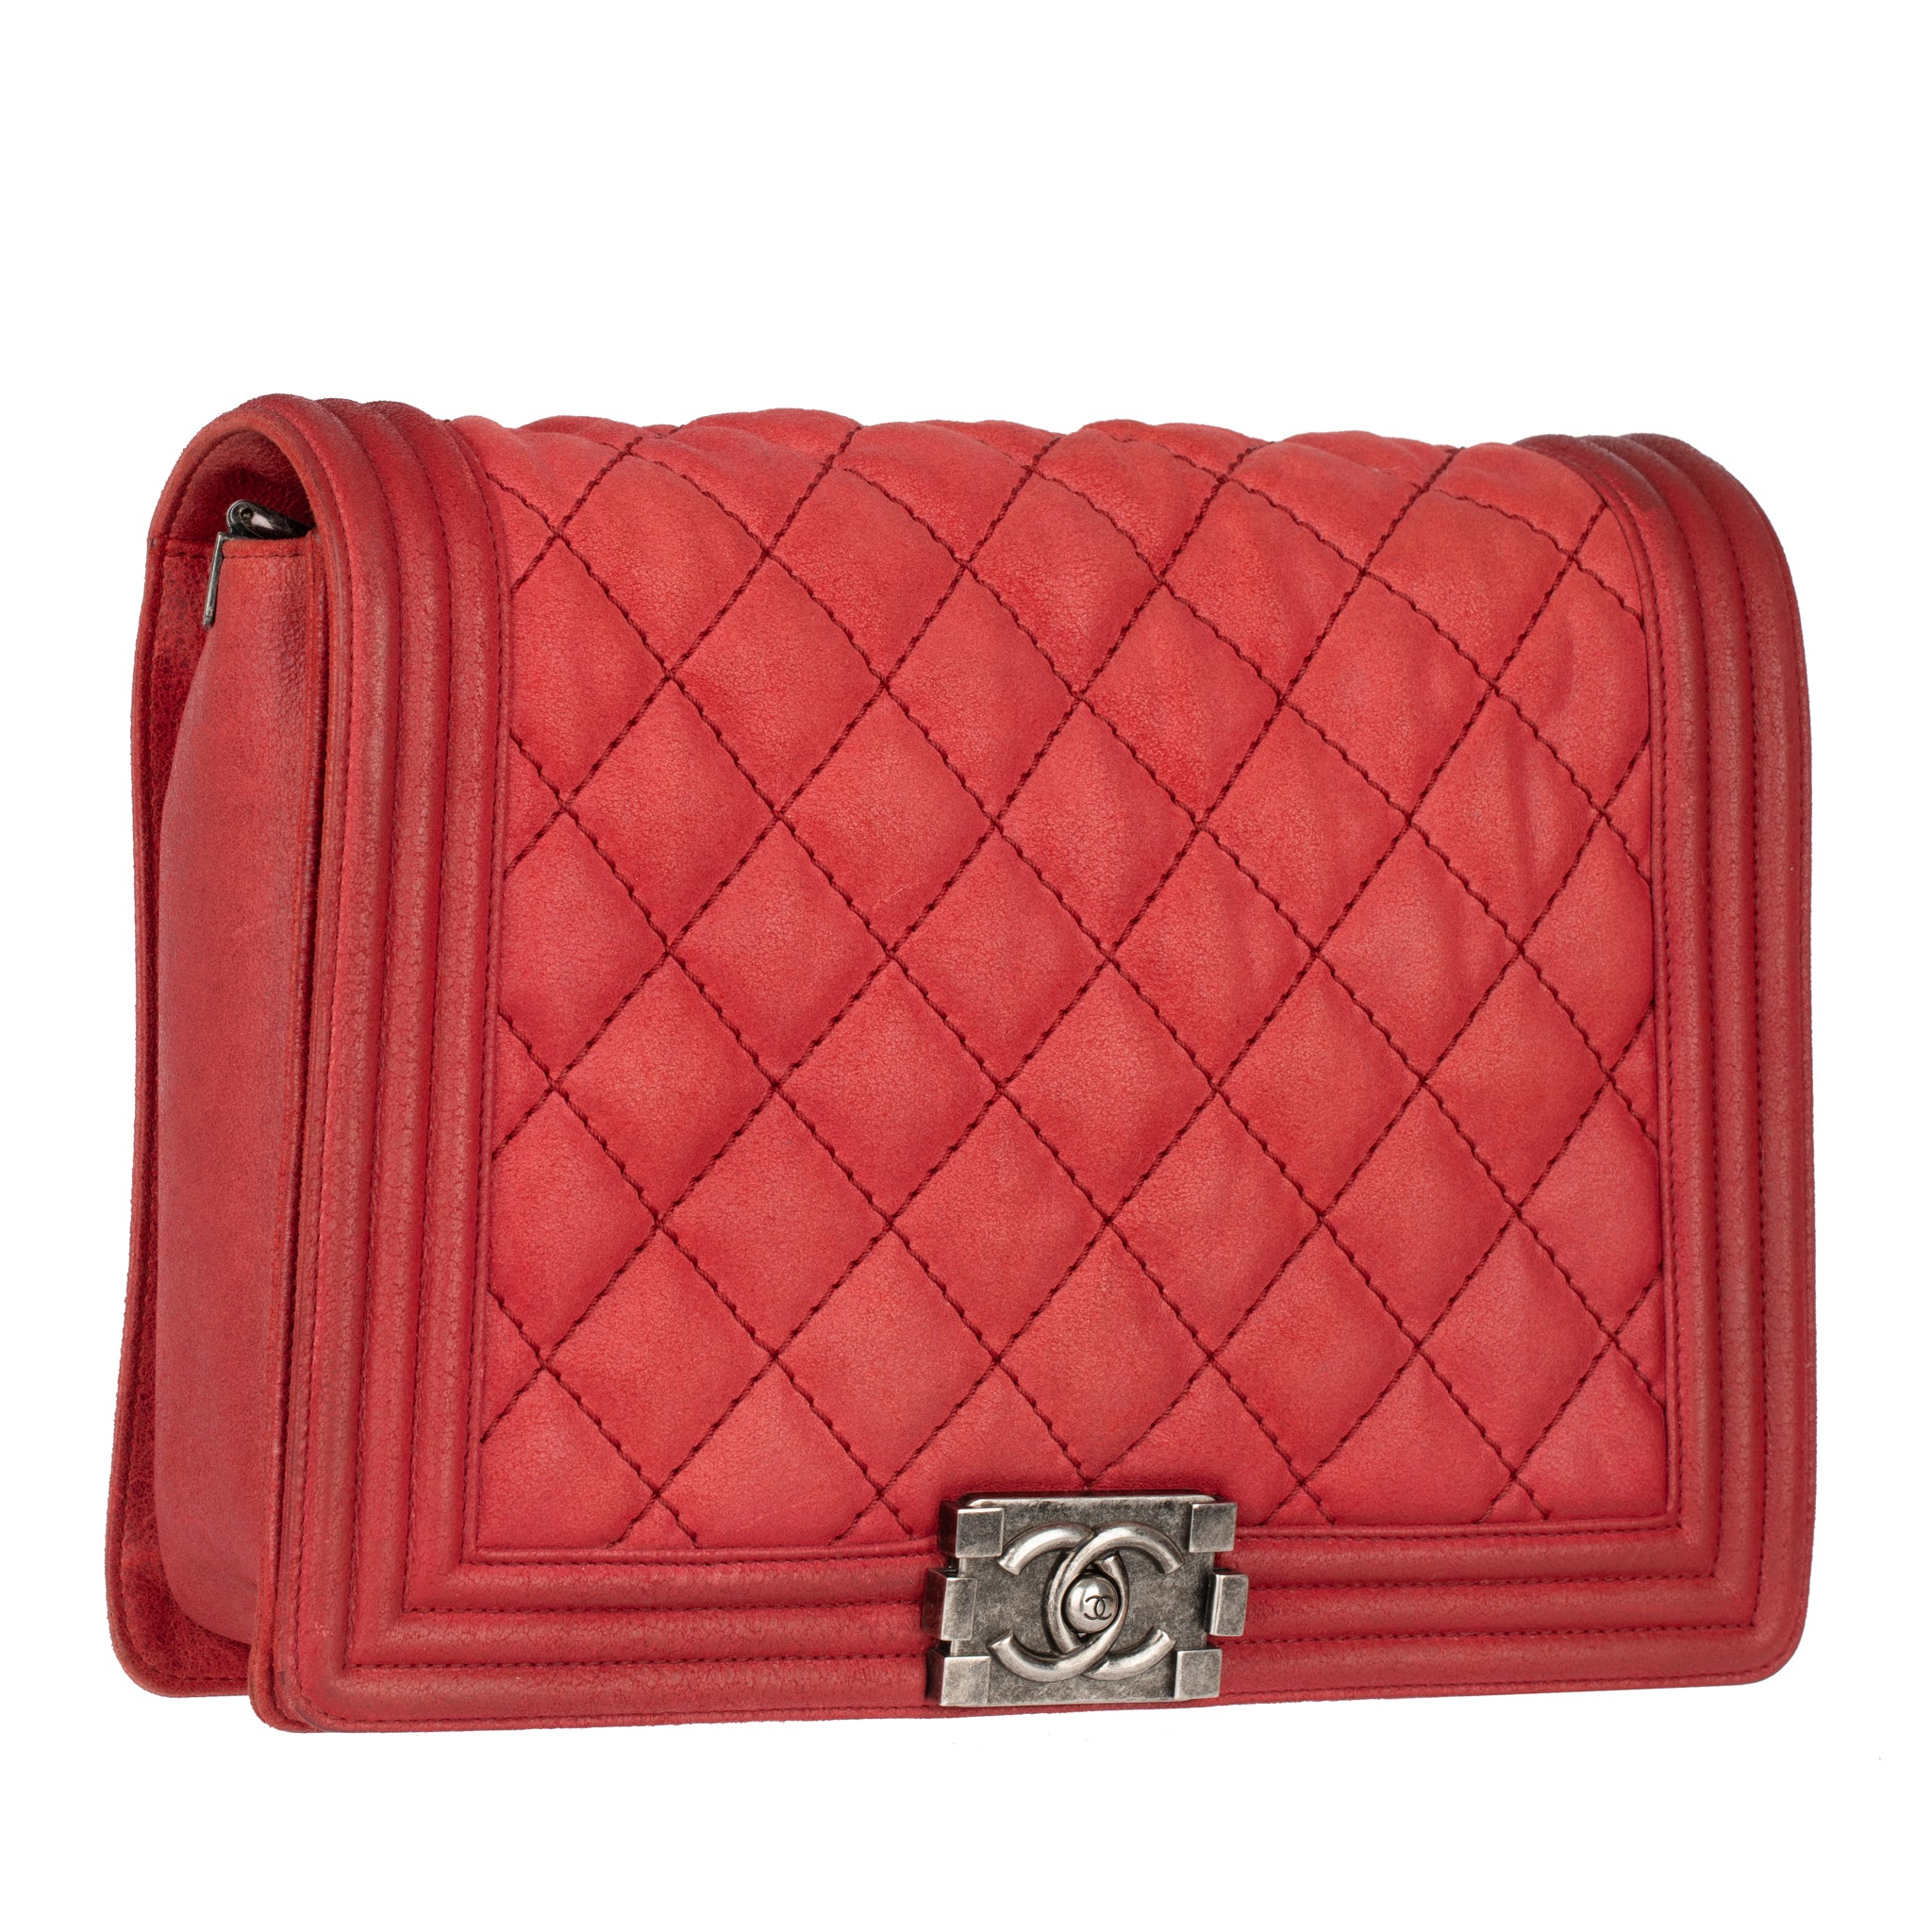 Chanel Red Quilted Suede Large Boy Flap Bag